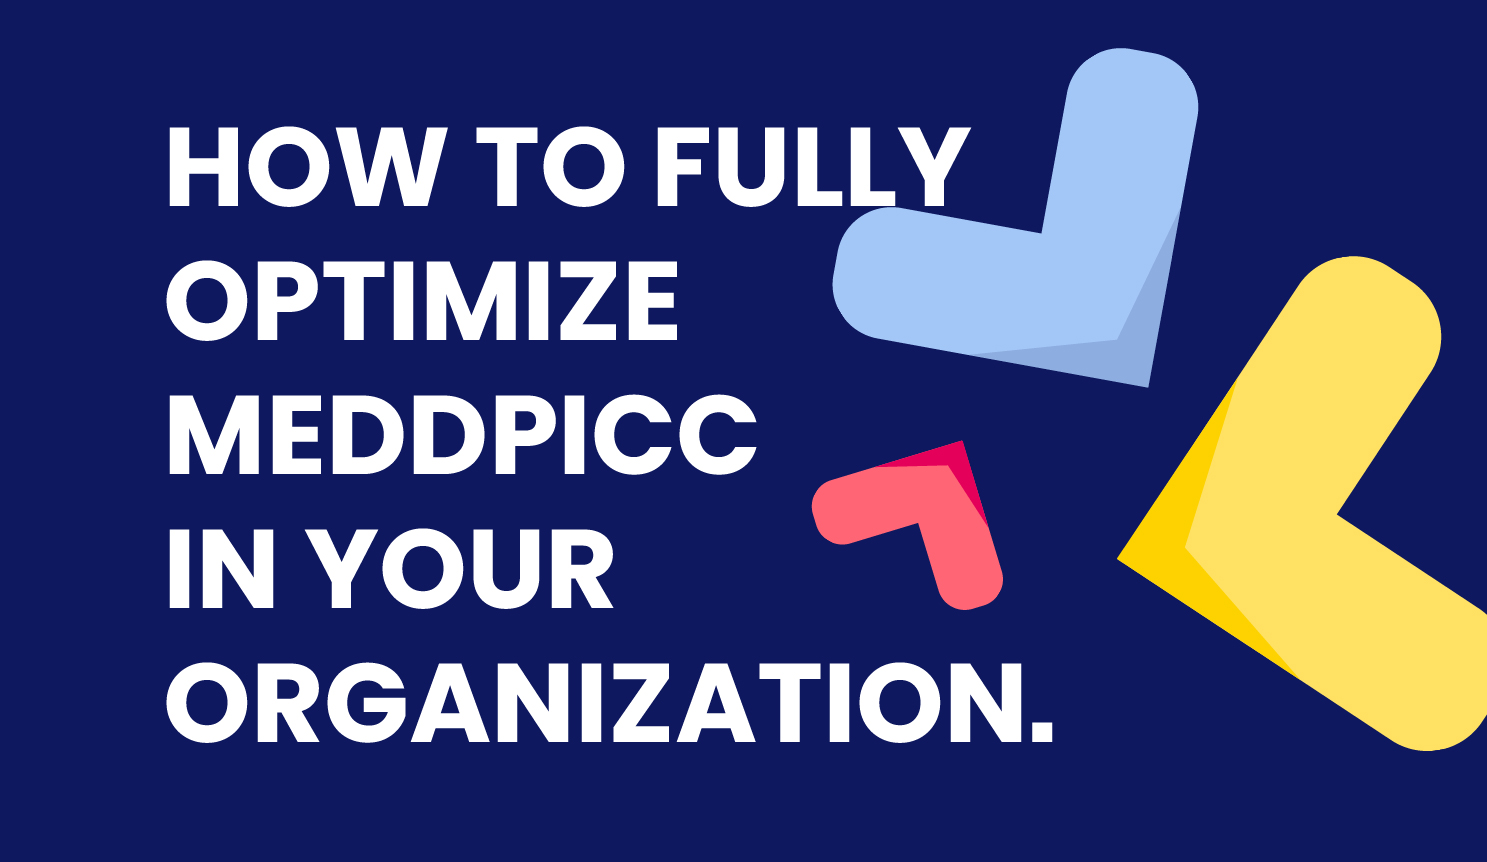 How to get a MEDDPICC 360 approach in Your Organization